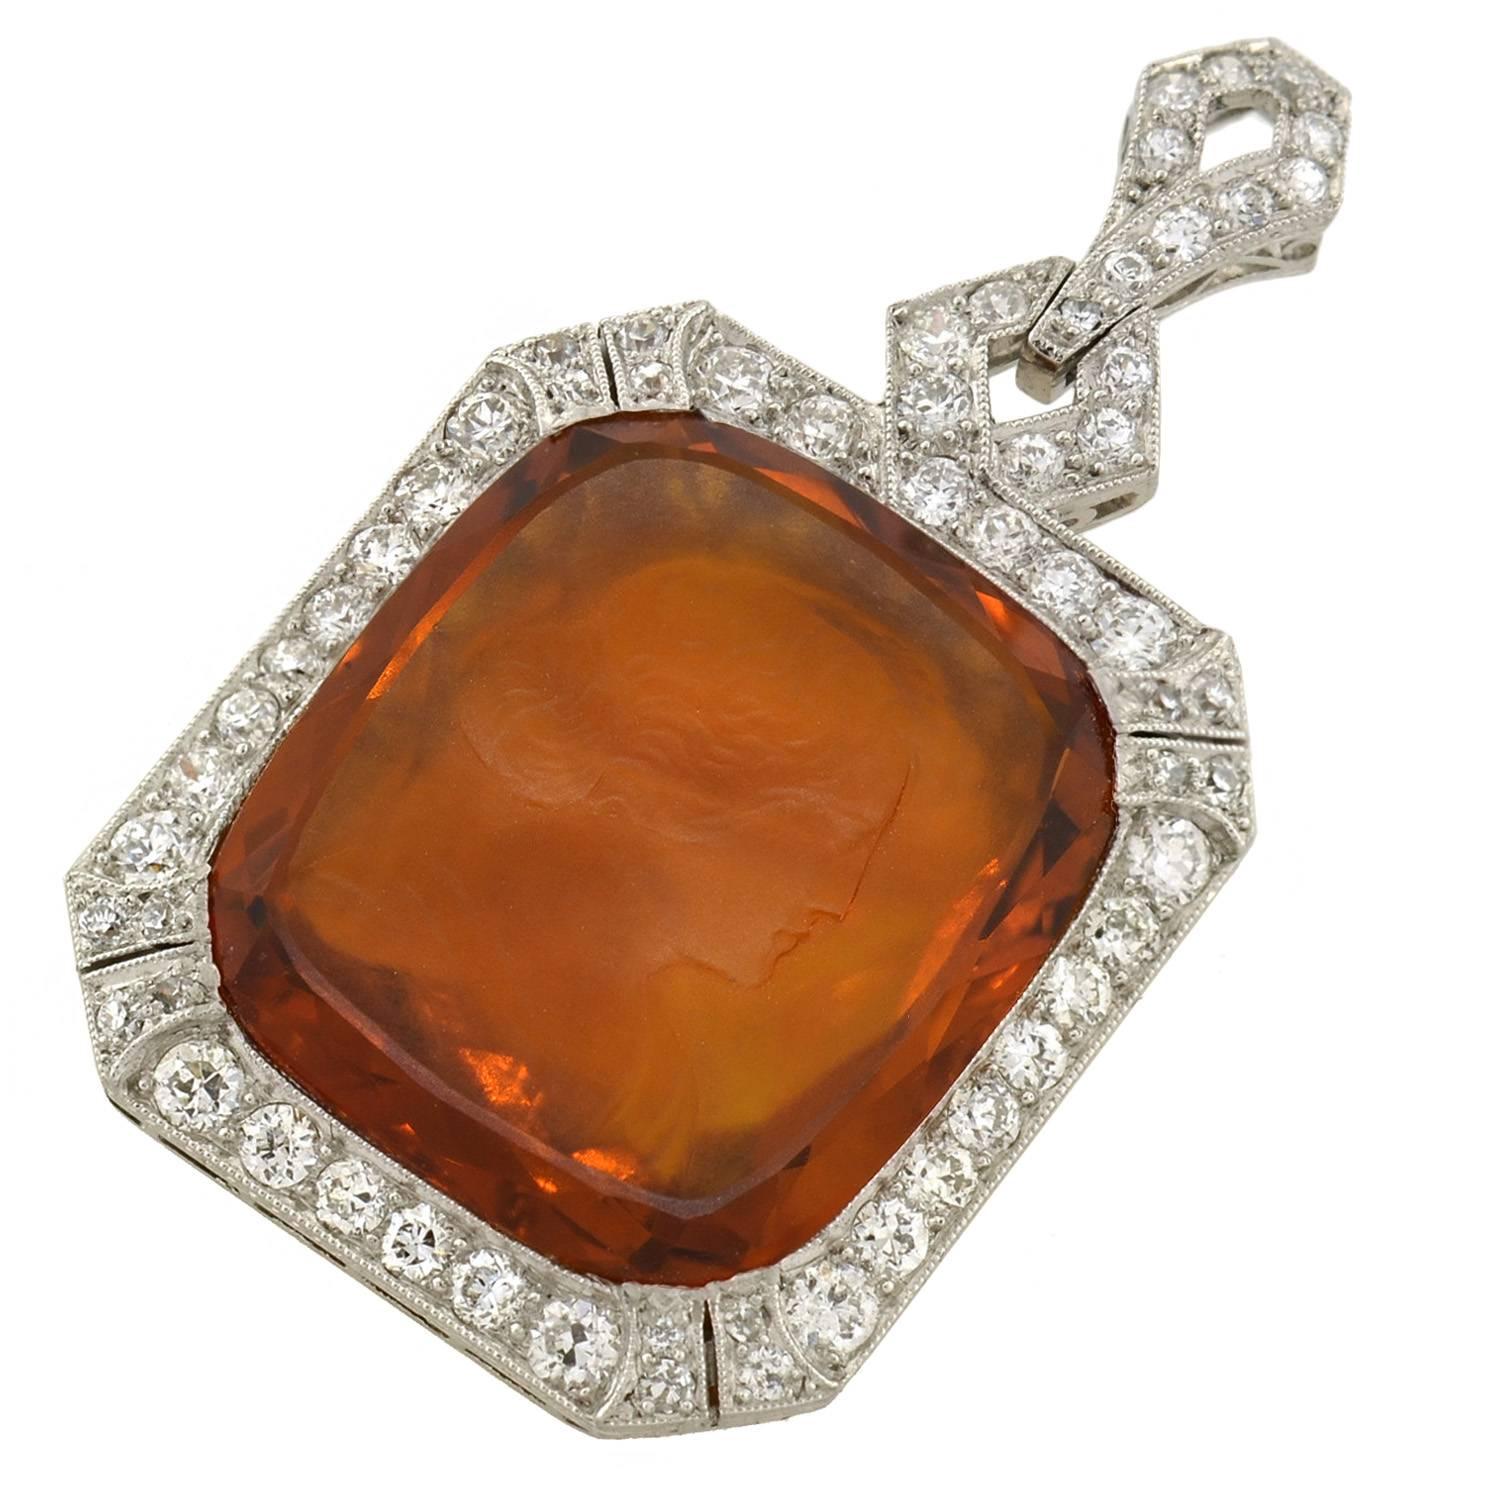 A stunning carved citrine cameo pendant from the Art Deco (1920) era! This fantastic piece depicts a large, rectangular-shaped citrine stone which is surrounded by sparkling diamonds. The citrine, which is vibrant in color with hues of orange,